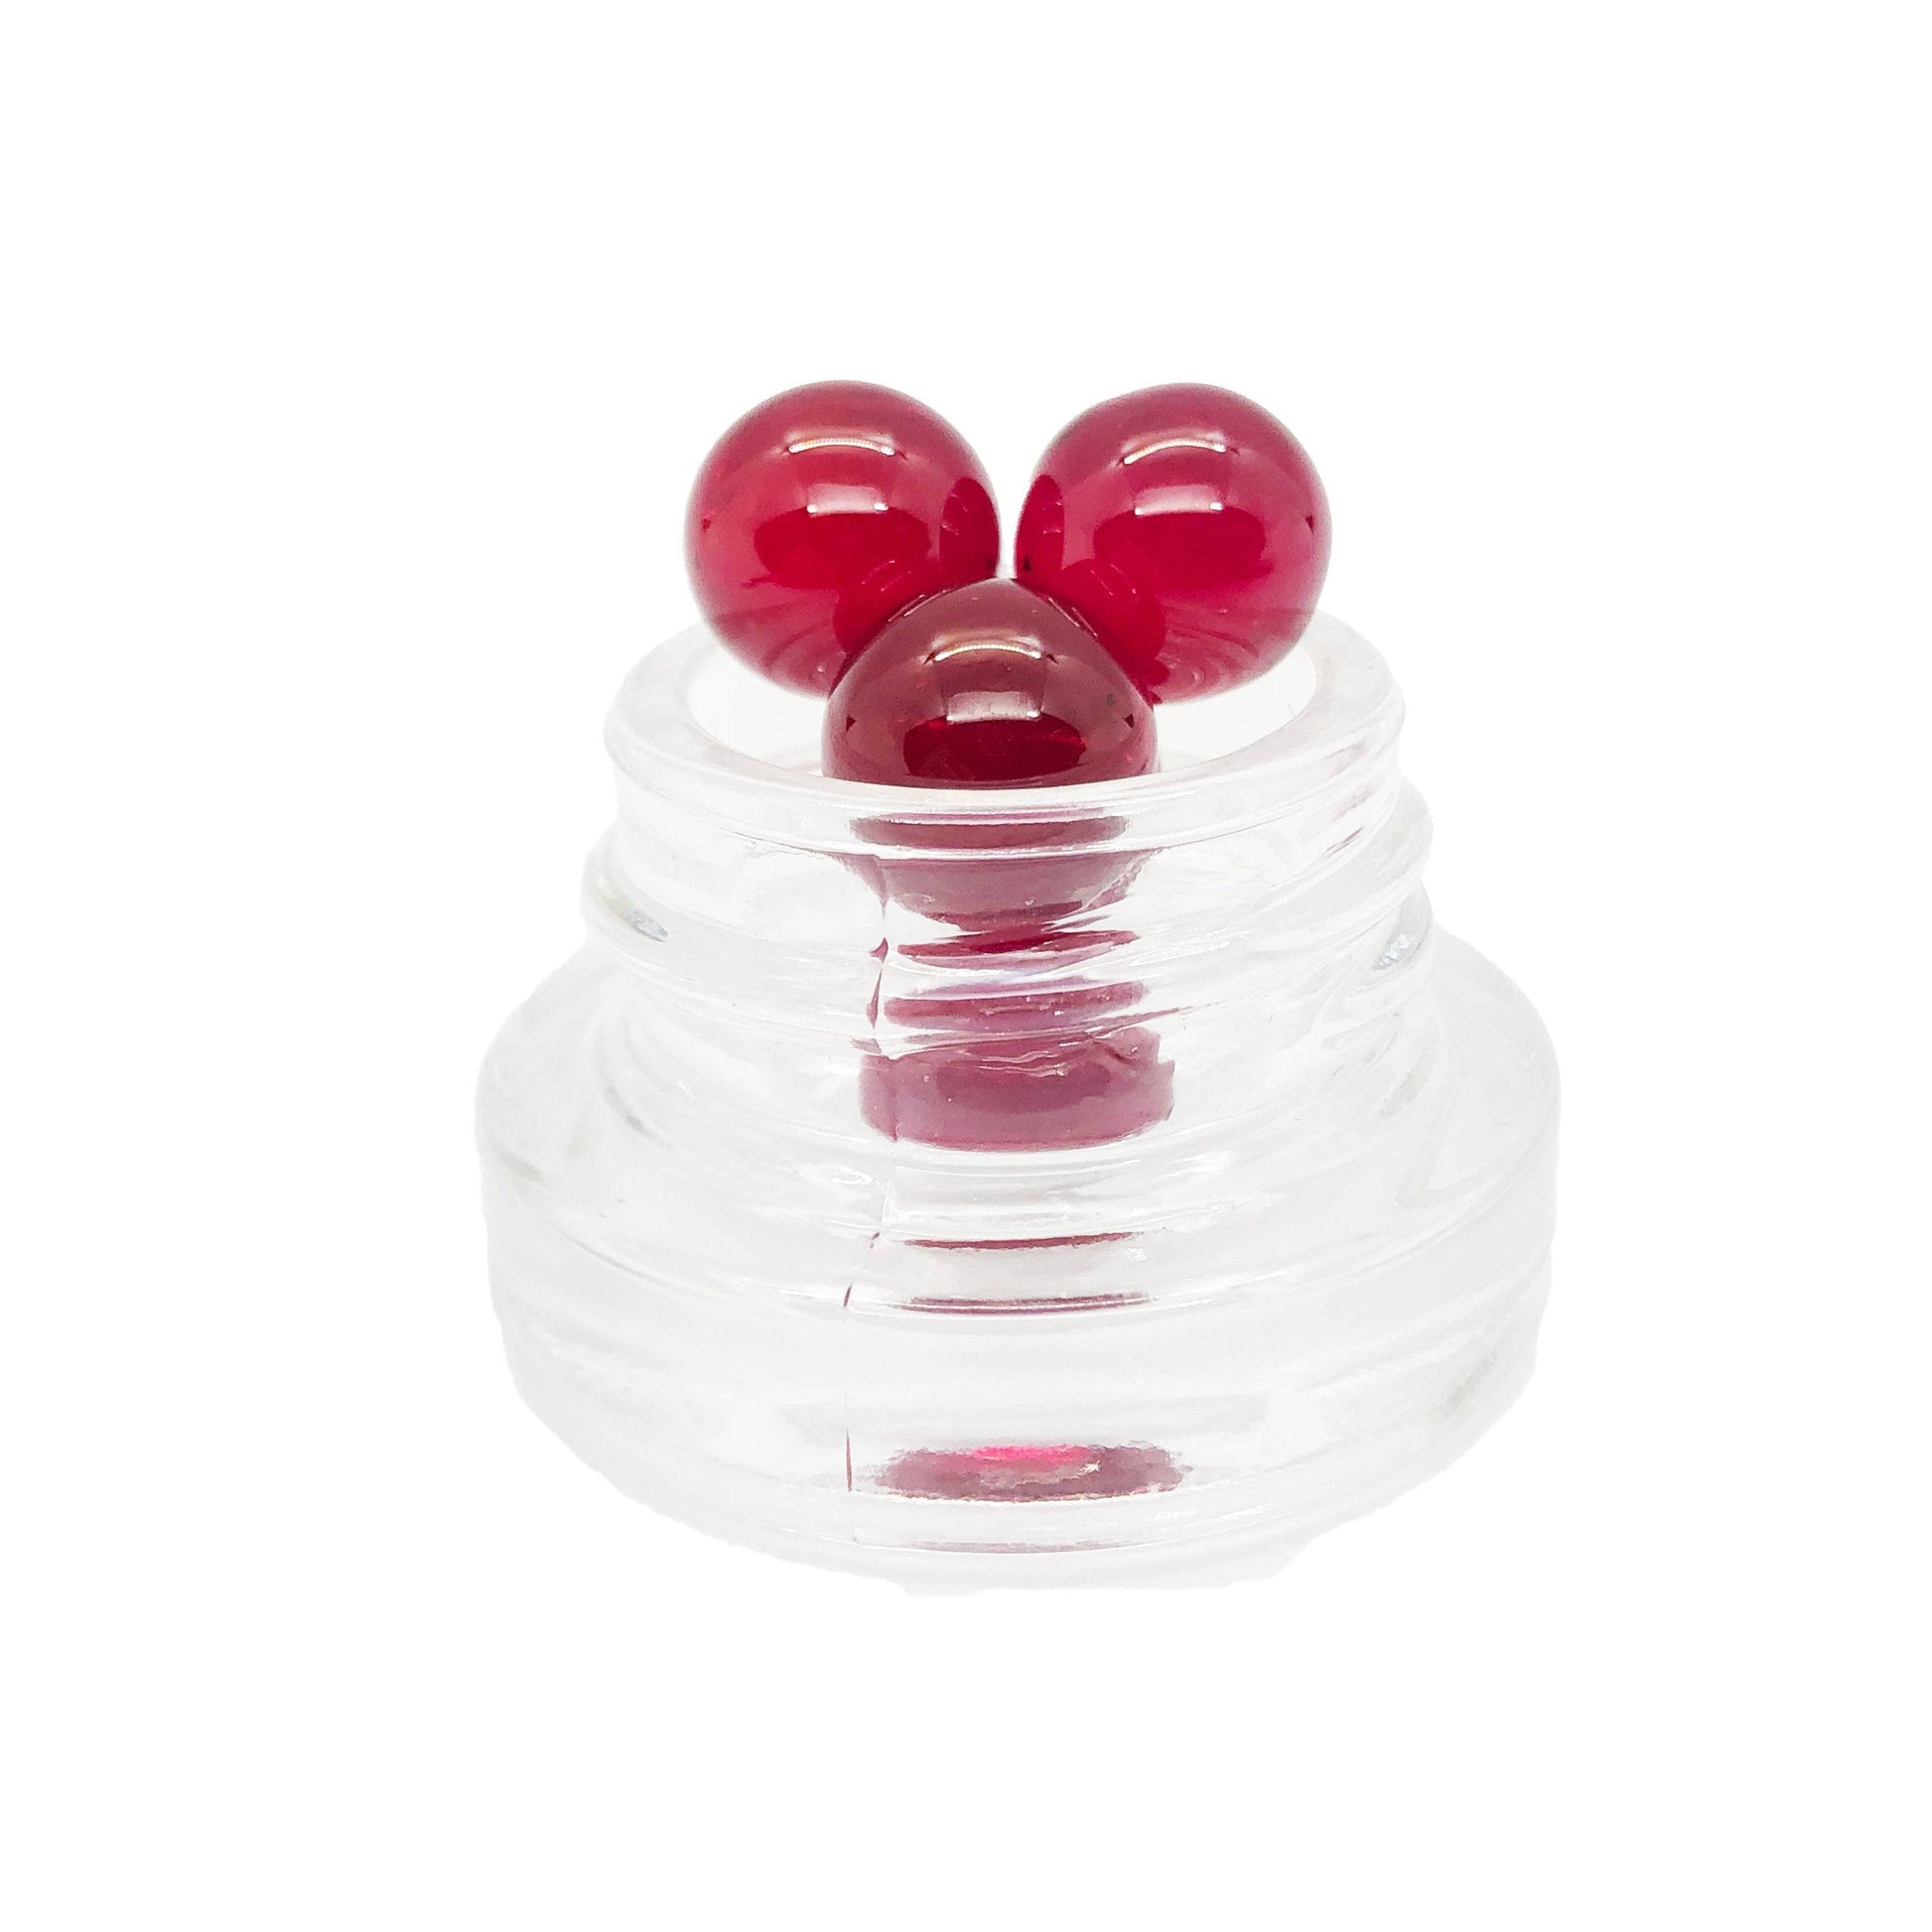 Terp Pearlz- Ruby Pearls by Terp Pearlz 3mm-12mm - OPS.com